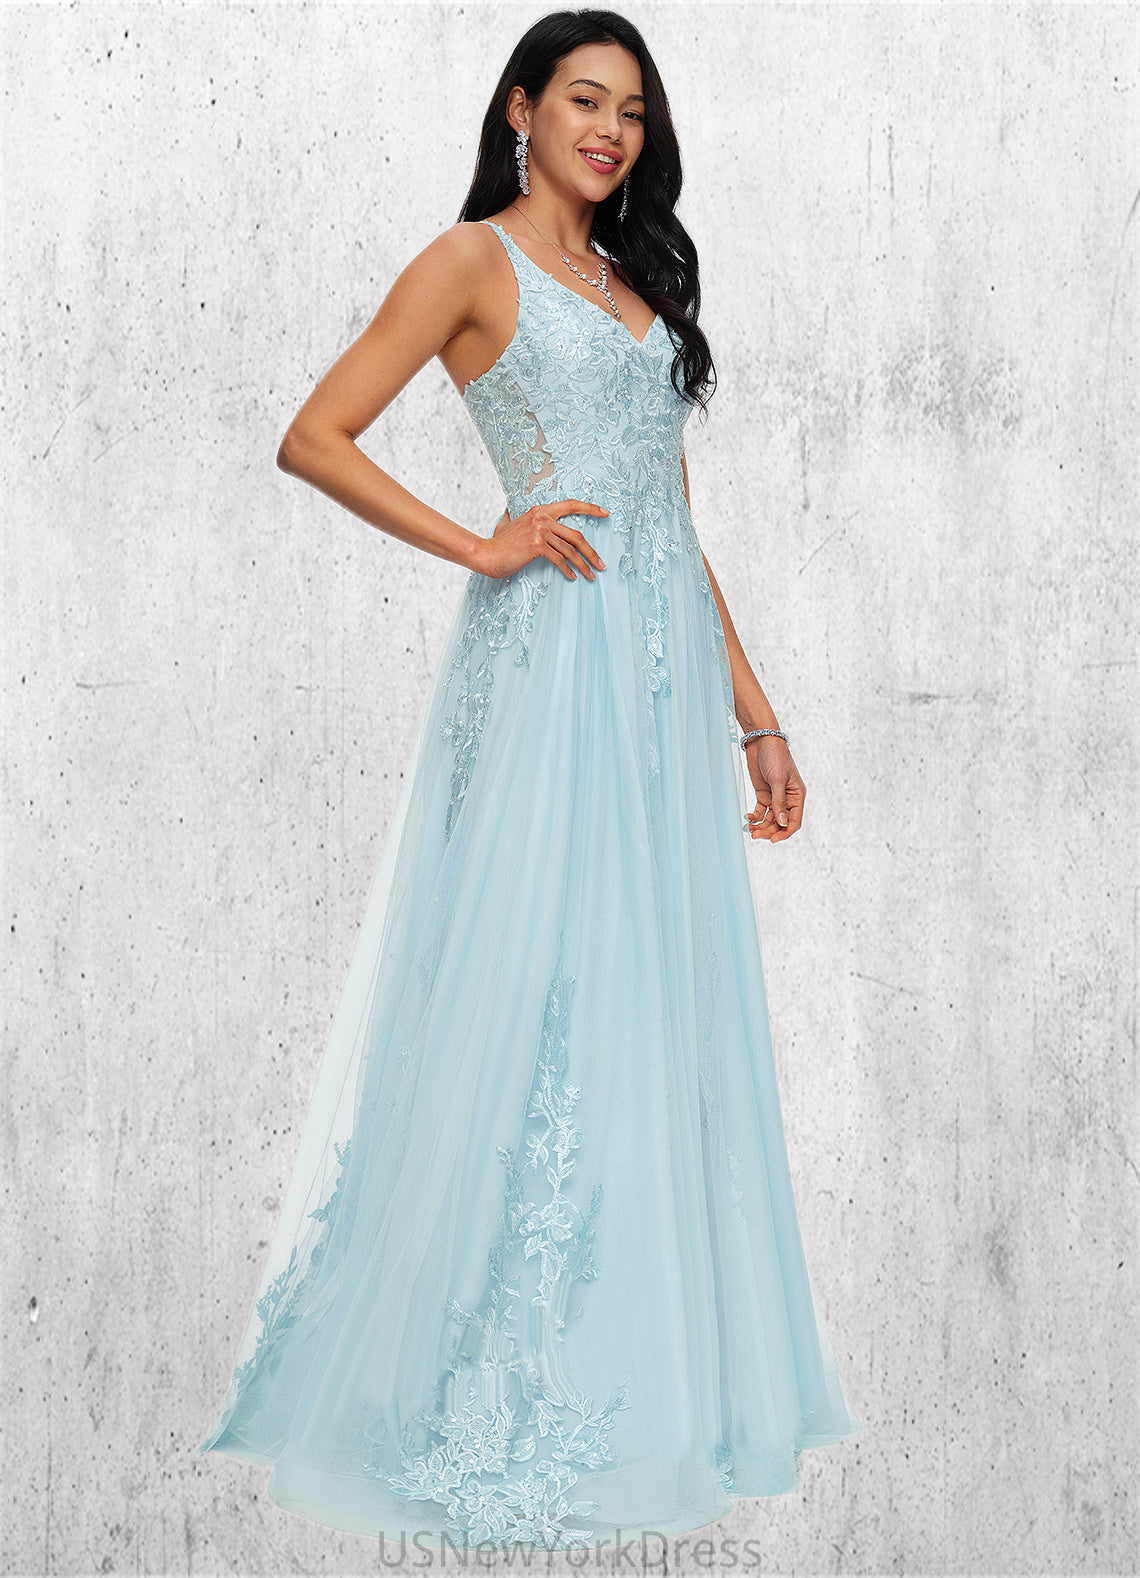 Natalee A-line V-Neck Floor-Length Tulle Prom Dresses With Rhinestone Appliques Lace Sequins DJP0022225